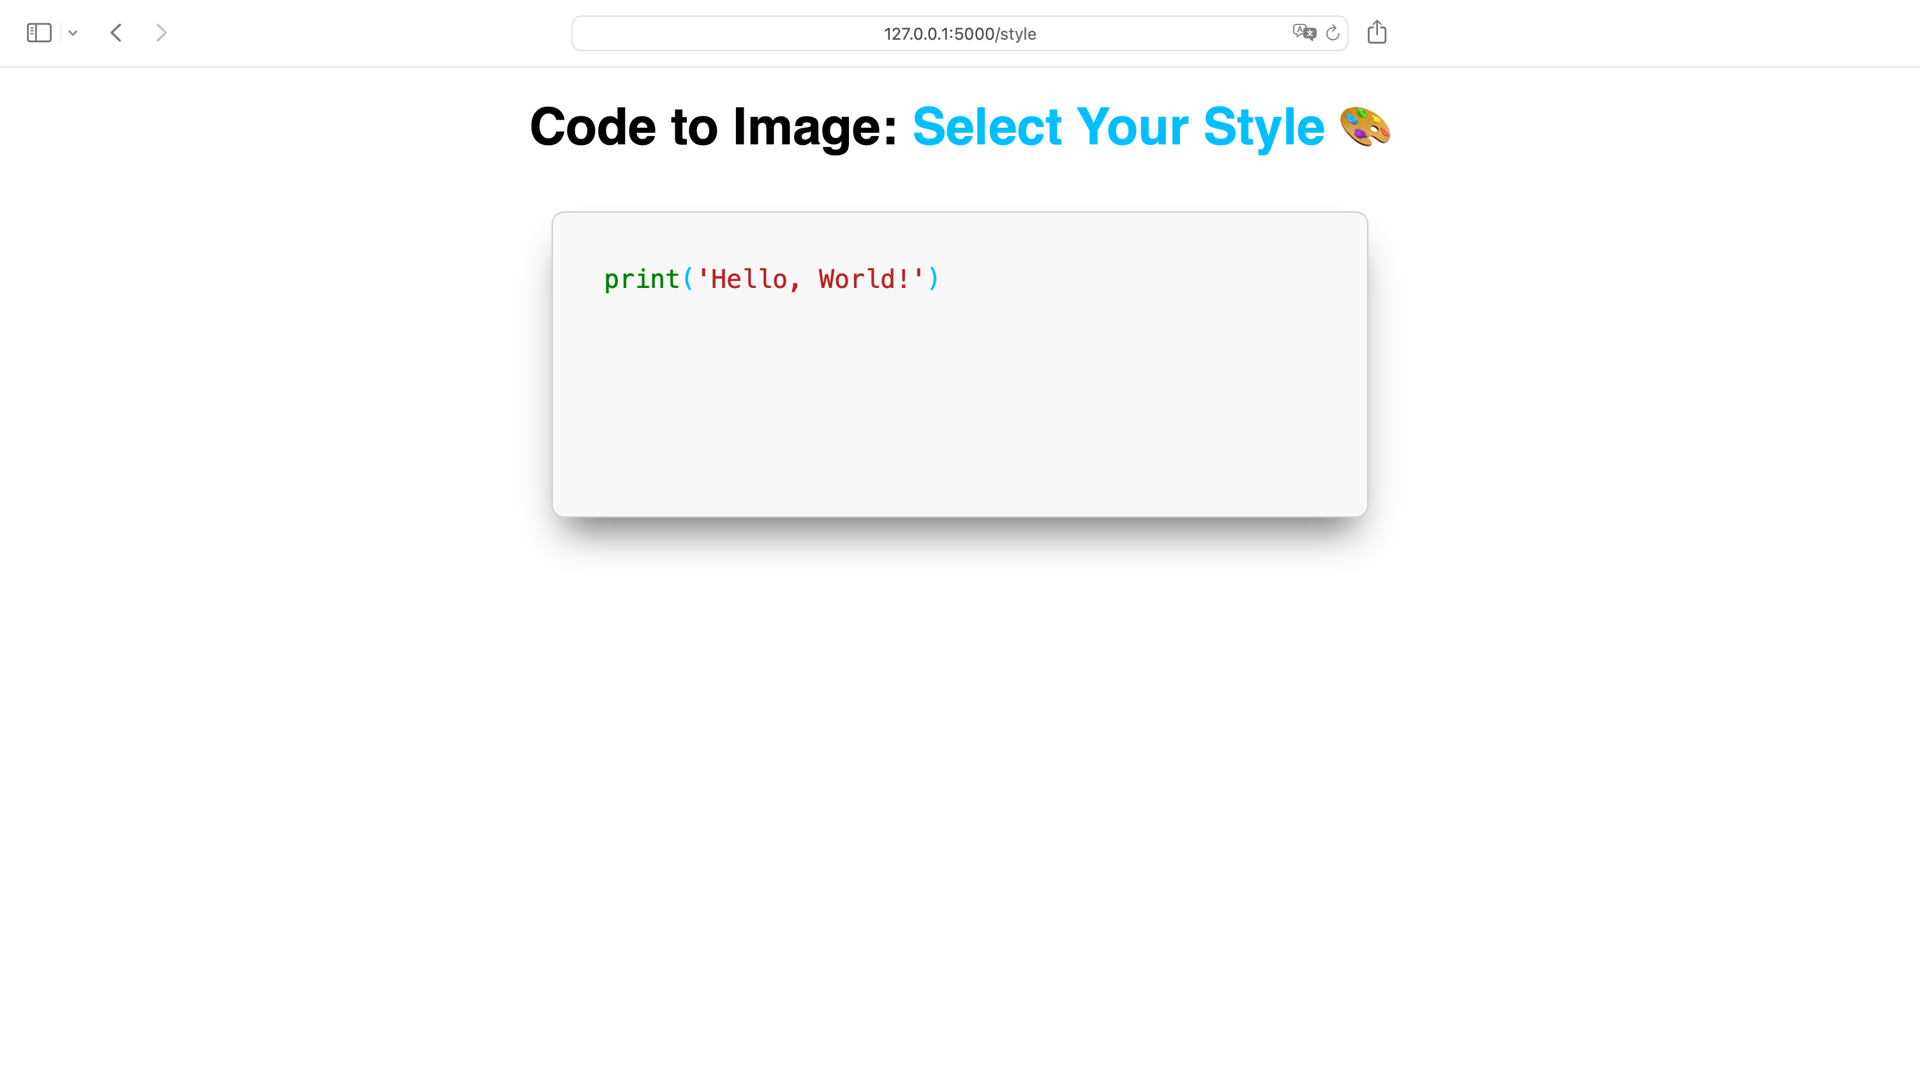 Code to Image Generator with highlighted code